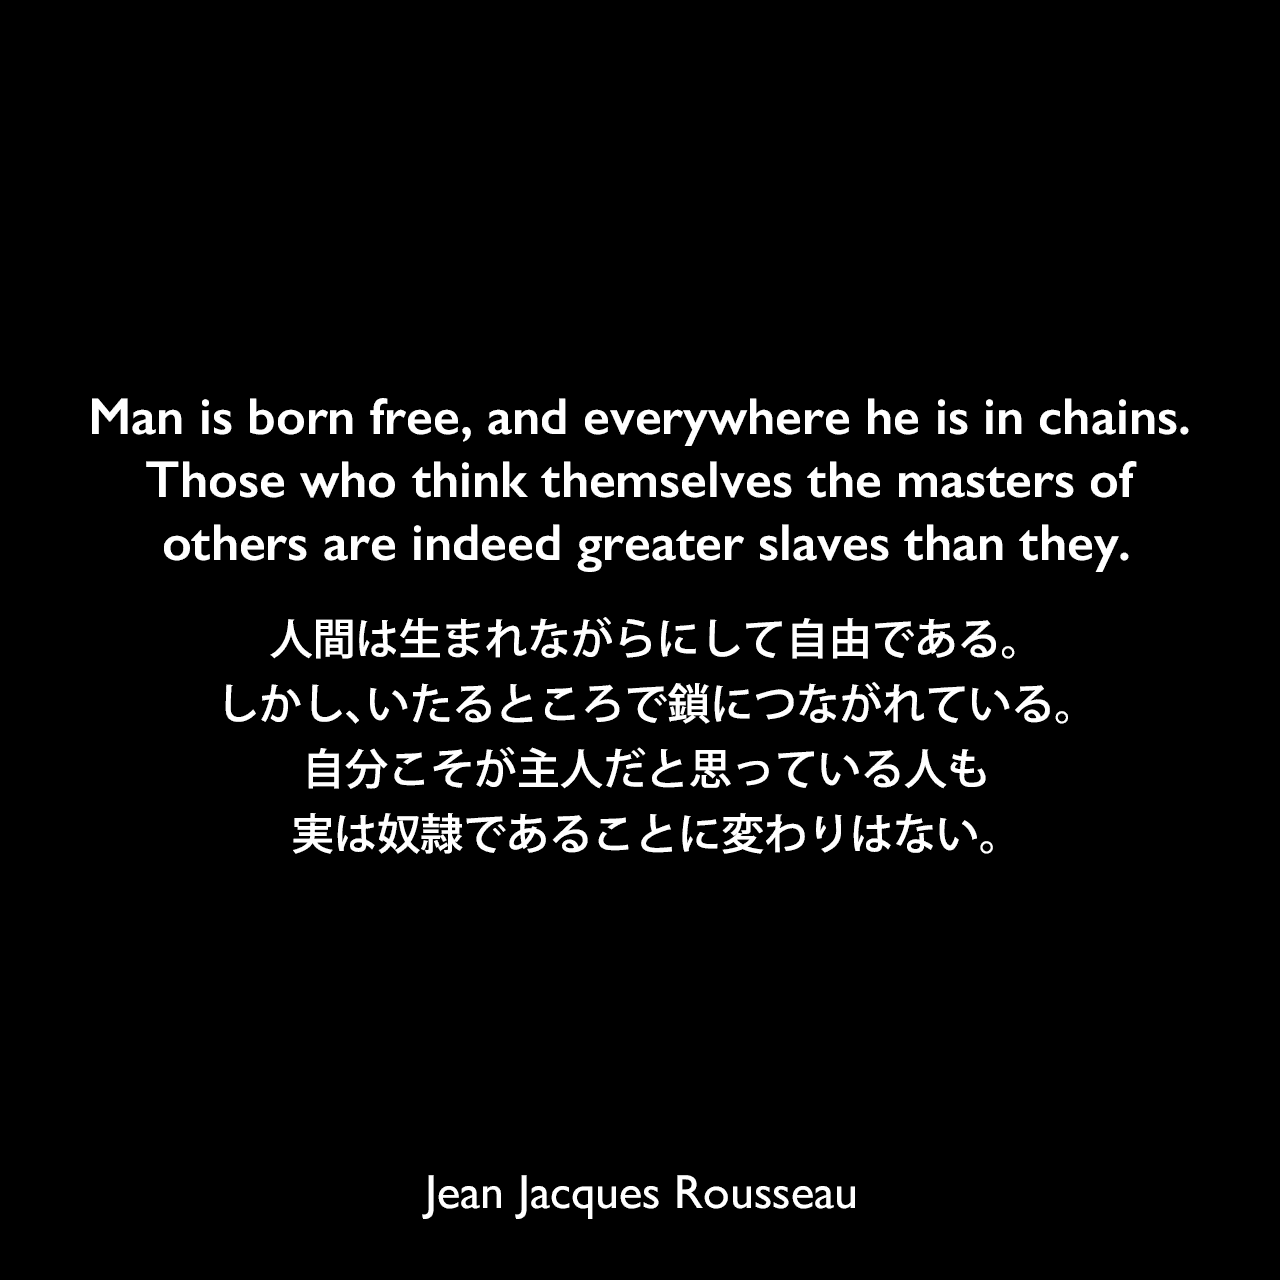 Man is born free, and everywhere he is in chains. Those who think themselves the masters of others are indeed greater slaves than they.人間は生まれながらにして自由である。しかし、いたるところで鎖につながれている。自分こそが主人だと思っている人も、実は奴隷であることに変わりはない。- ルソーによる本「社会契約論」よりJean Jacques Rousseau